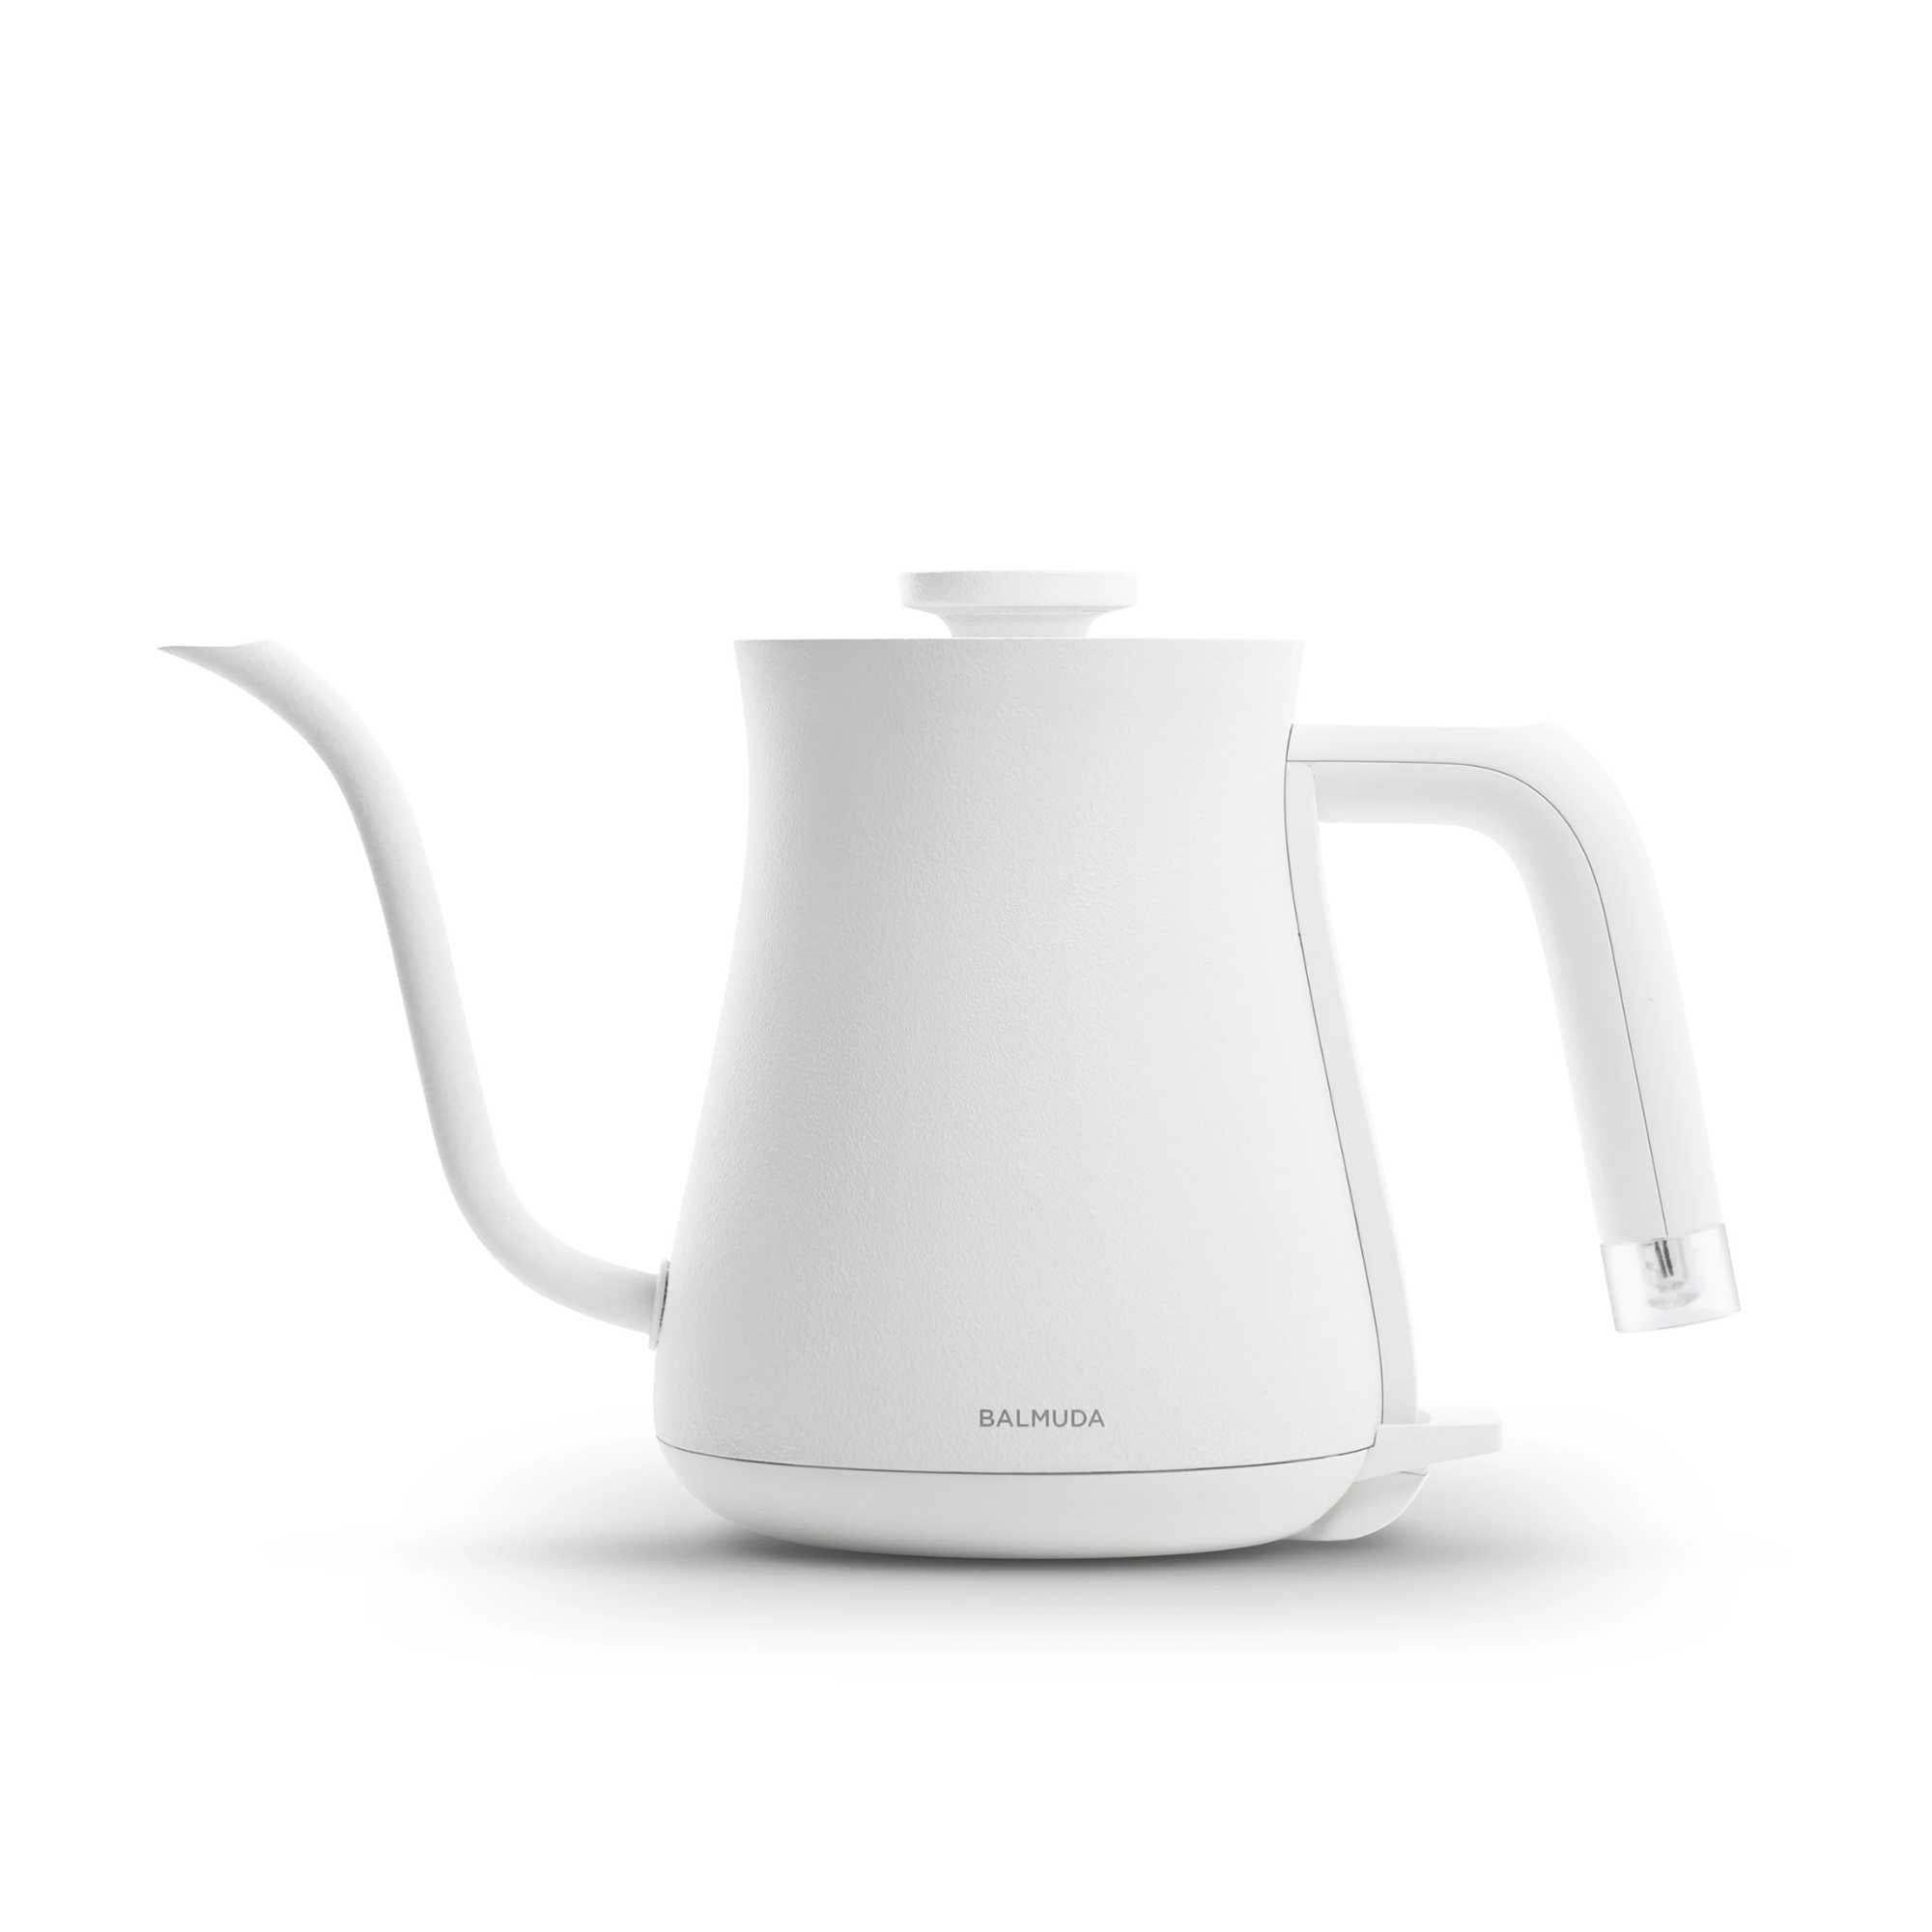 BALMUDA The Kettle electric kettle, white